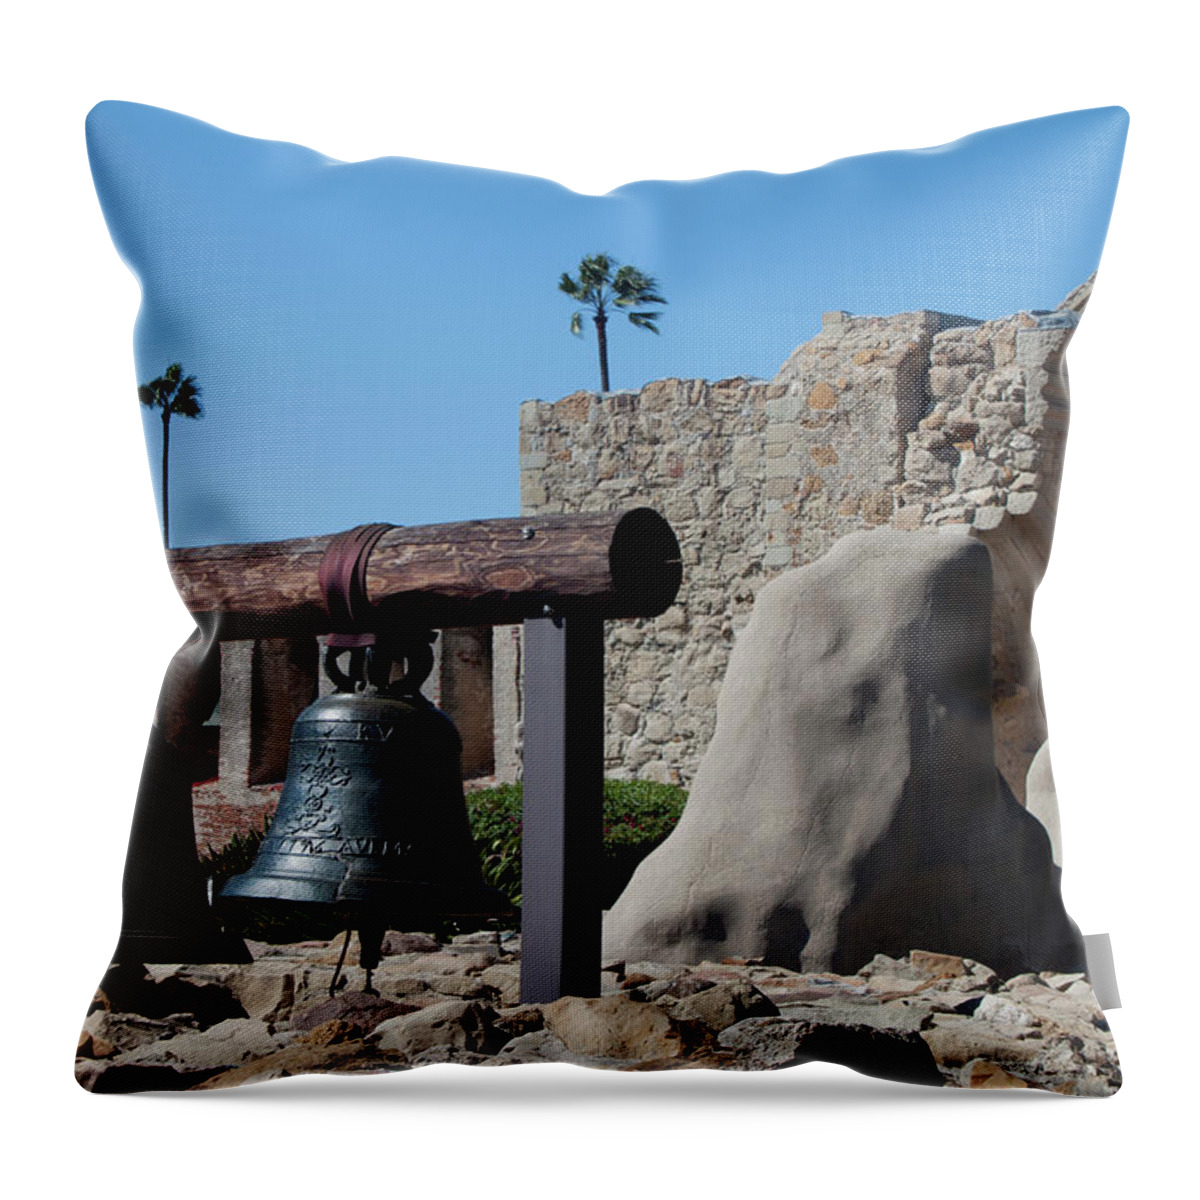 Mission Throw Pillow featuring the photograph Original Bell Tower by Ivete Basso Photography